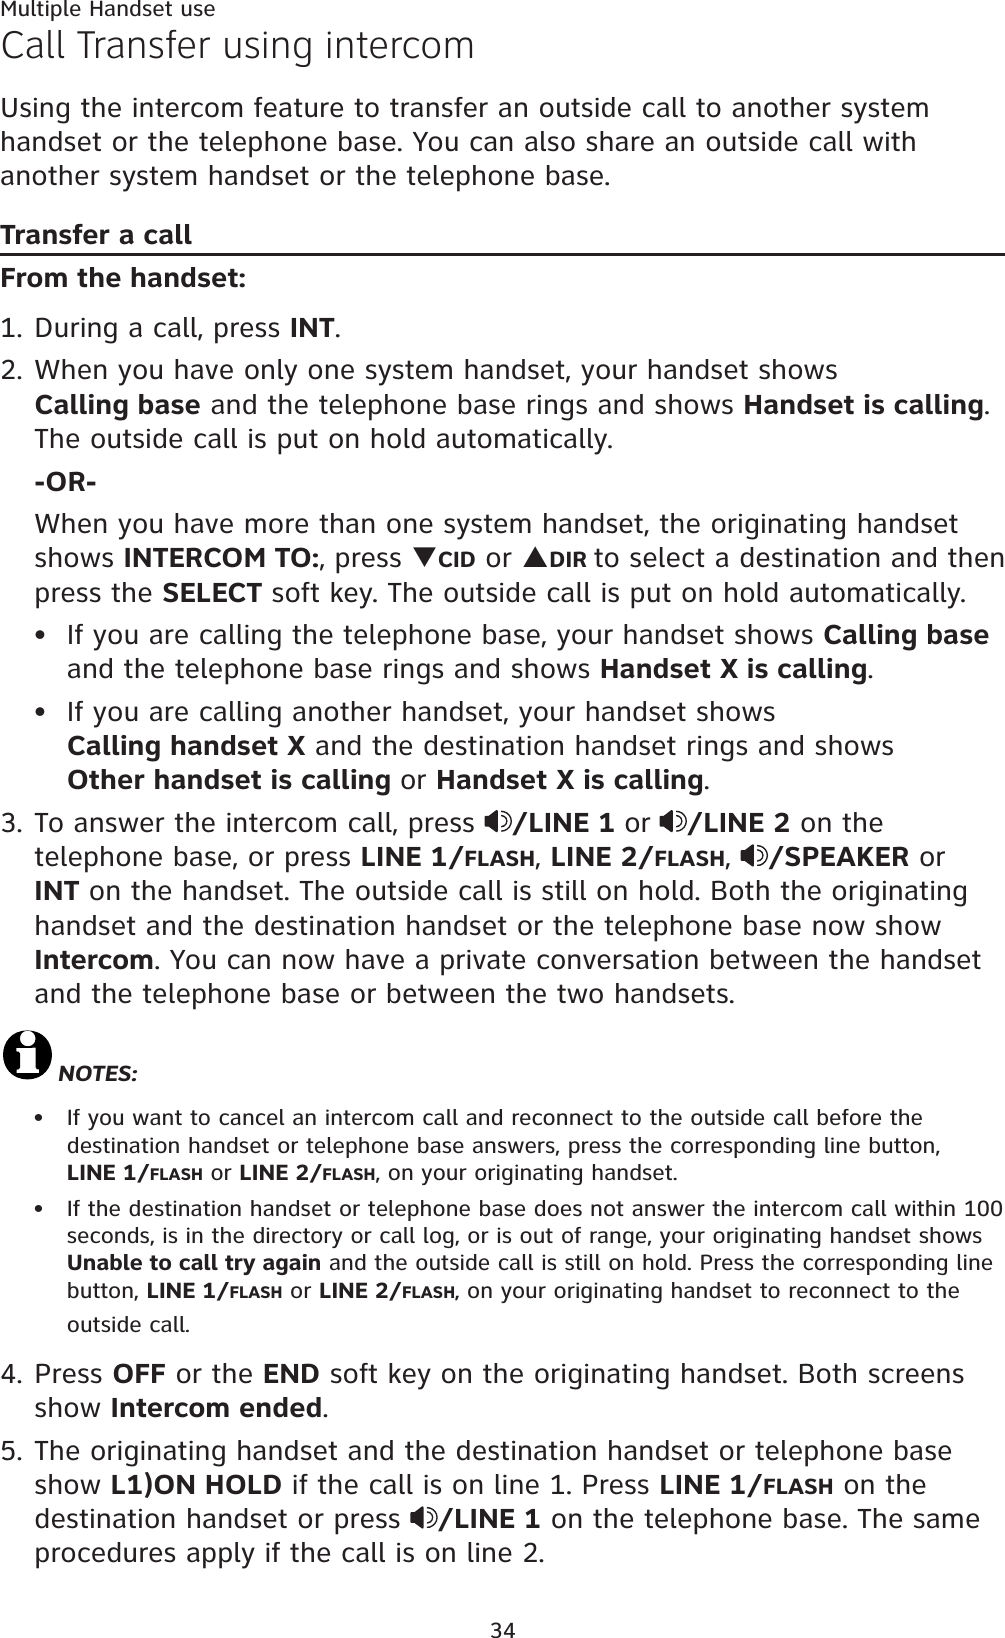 Multiple Handset use34Call Transfer using intercomUsing the intercom feature to transfer an outside call to another system handset or the telephone base. You can also share an outside call with another system handset or the telephone base.Transfer a callFrom the handset:1. During a call, press INT.2. When you have only one system handset, your handset shows        Calling base and the telephone base rings and shows Handset is calling.The outside call is put on hold automatically. -OR-When you have more than one system handset, the originating handset shows INTERCOM TO:, press TCID or SDIR to select a destination and then  press the SELECT soft key. The outside call is put on hold automatically.If you are calling the telephone base, your handset shows Calling baseand the telephone base rings and shows Handset X is calling.If you are calling another handset, your handset shows               Calling handset X and the destination handset rings and showsOther handset is calling or Handset X is calling.3. To answer the intercom call, press  /LINE 1 or /LINE 2 on the telephone base, or press LINE 1/FLASH,LINE 2/FLASH,/SPEAKER or INT on the handset. The outside call is still on hold. Both the originating handset and the destination handset or the telephone base now show Intercom. You can now have a private conversation between the handset and the telephone base or between the two handsets.NOTES:If you want to cancel an intercom call and reconnect to the outside call before the destination handset or telephone base answers, press the corresponding line button,   LINE 1/FLASH or LINE 2/FLASH, on your originating handset. If the destination handset or telephone base does not answer the intercom call within 100 seconds, is in the directory or call log, or is out of range, your originating handset shows Unable to call try again and the outside call is still on hold. Press the corresponding line button, LINE 1/FLASH or LINE 2/FLASH, on your originating handset to reconnect to the outside call.4. Press OFF or the END soft key on the originating handset. Both screens show Intercom ended.5. The originating handset and the destination handset or telephone base show L1)ON HOLD if the call is on line 1. Press LINE 1/FLASH on the destination handset or press  /LINE 1 on the telephone base. The same procedures apply if the call is on line 2.••••